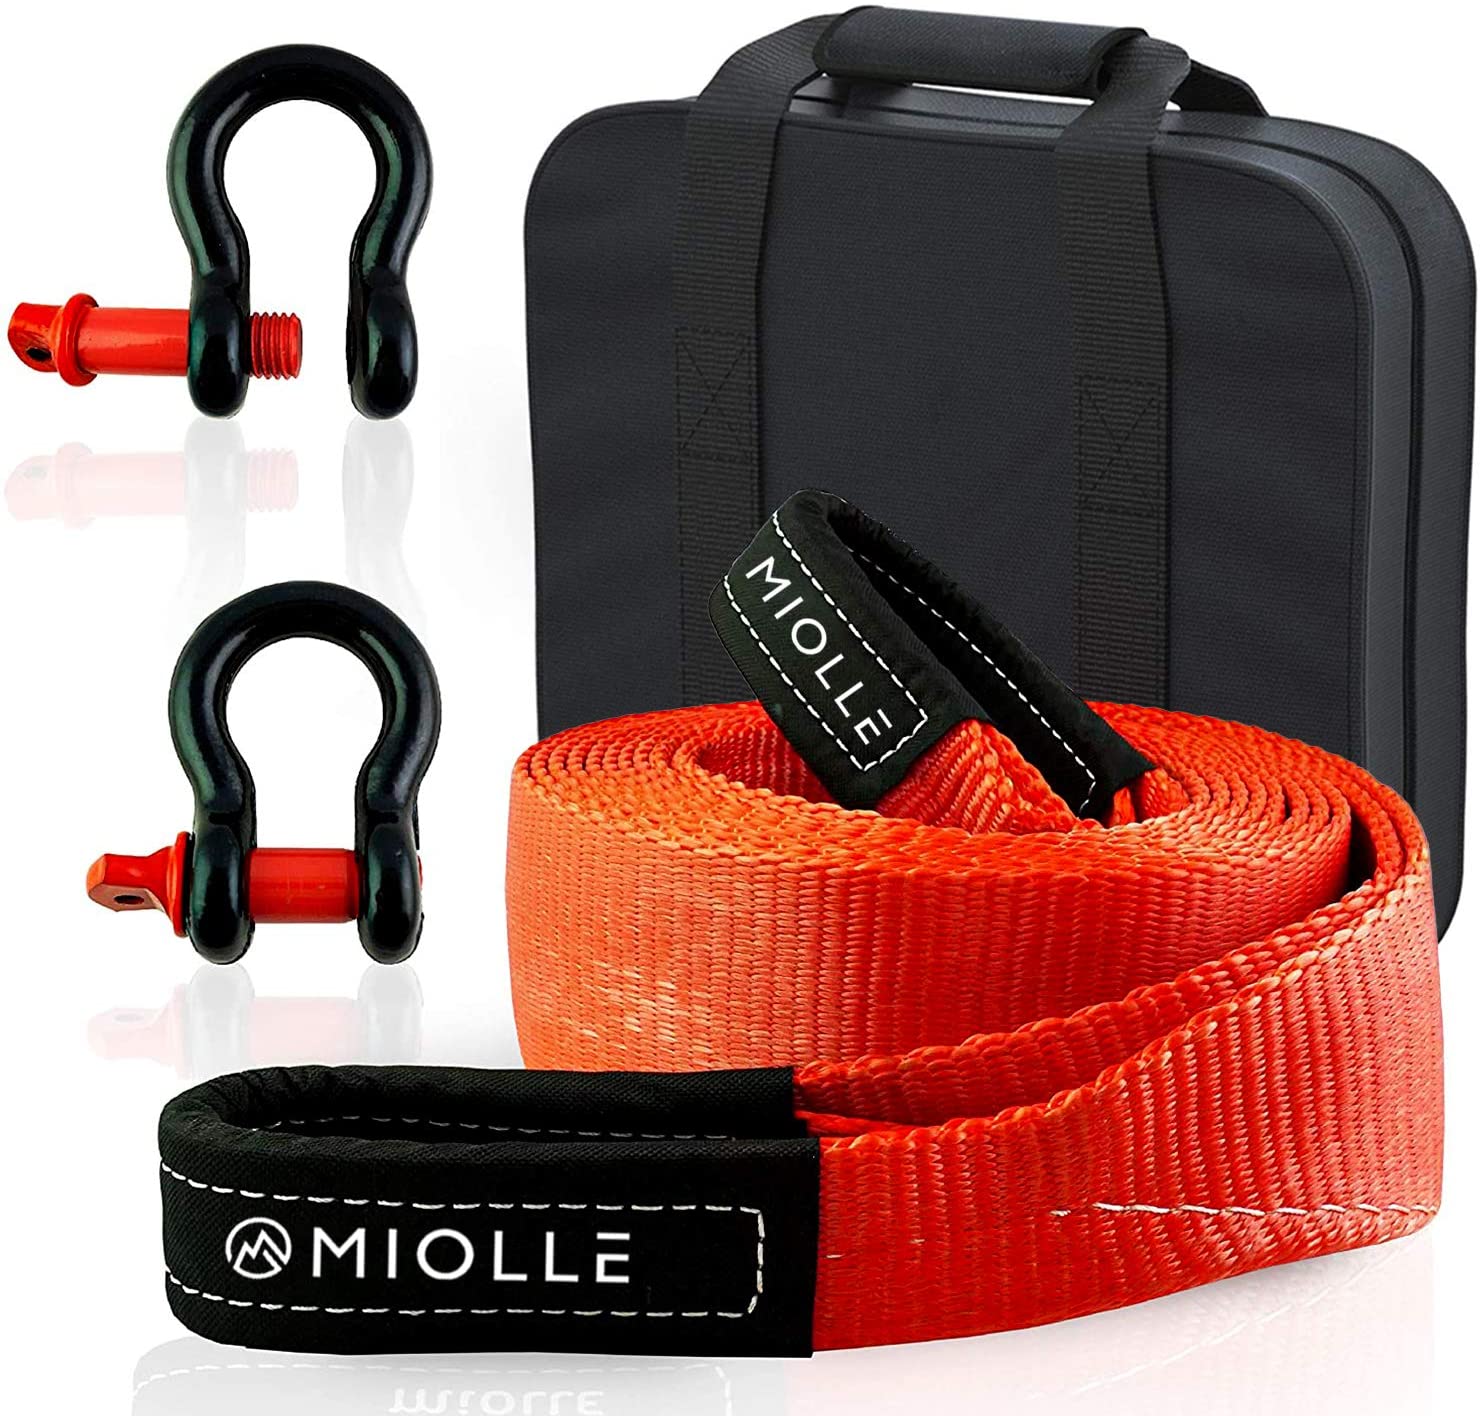 Miolle Offroad Recovery Set Tow Strap 2”x20’ (20990lb) - Lab Tested MBS Tow Rope for Small Vehicles, ATV, UTV, Snowmobile (2 inch x 20 foot)